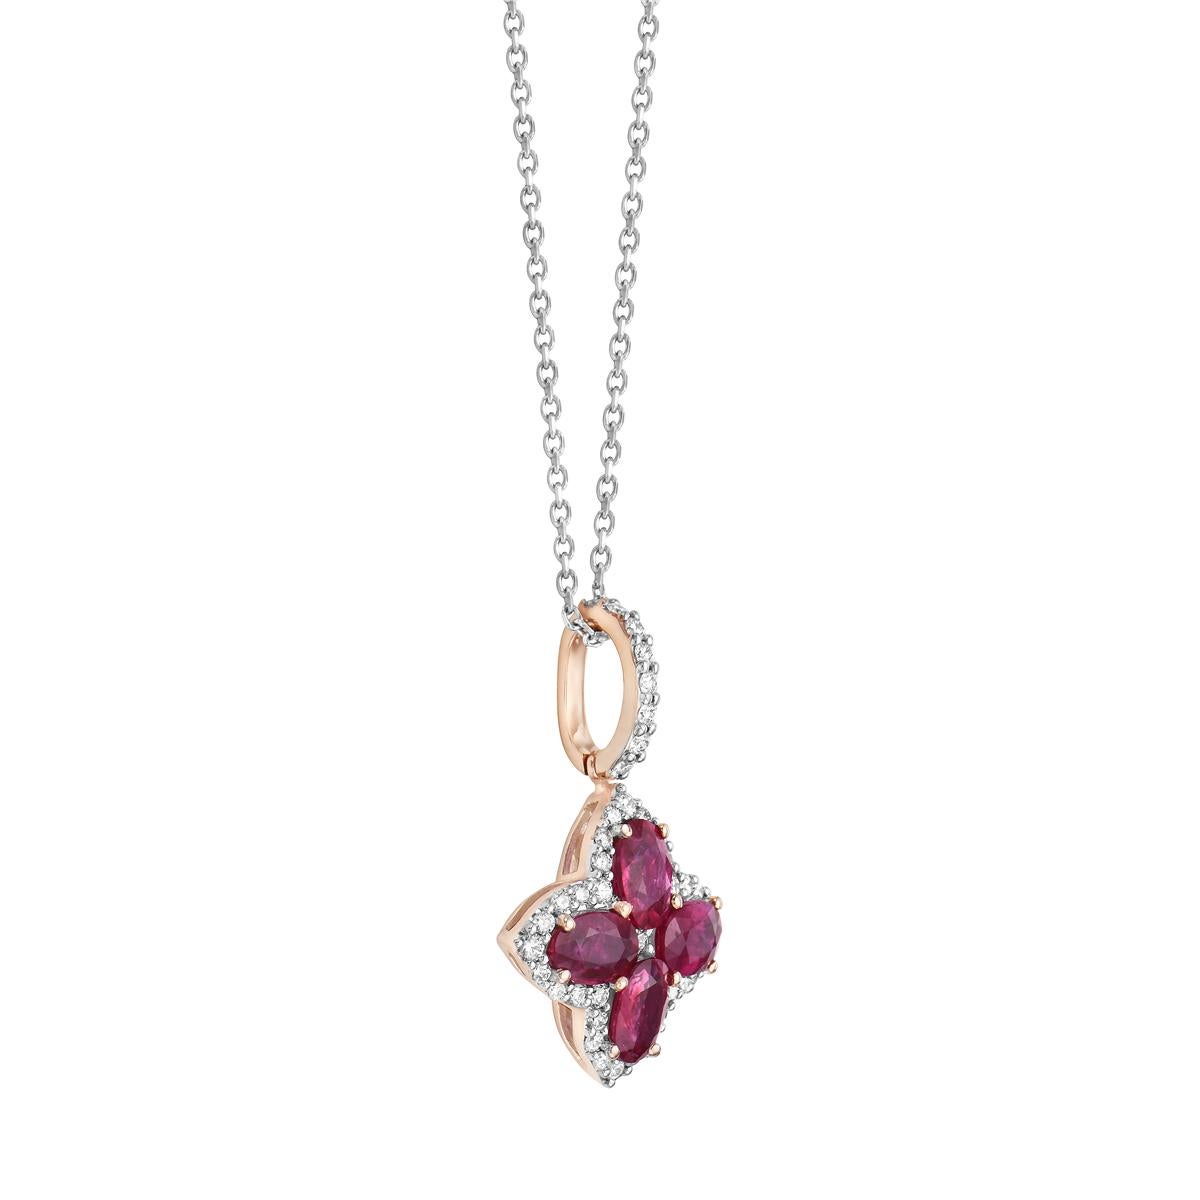 This beautiful pendant is made from 1.6 grams of 14 karat rose gold. The flower shape is made from 4 rubies totaling 2.3 carats and a total of 41 round diamonds totaling 0.42 carats, including SI1-SI2, GH color diamonds. A 14 karat 18-inch cable